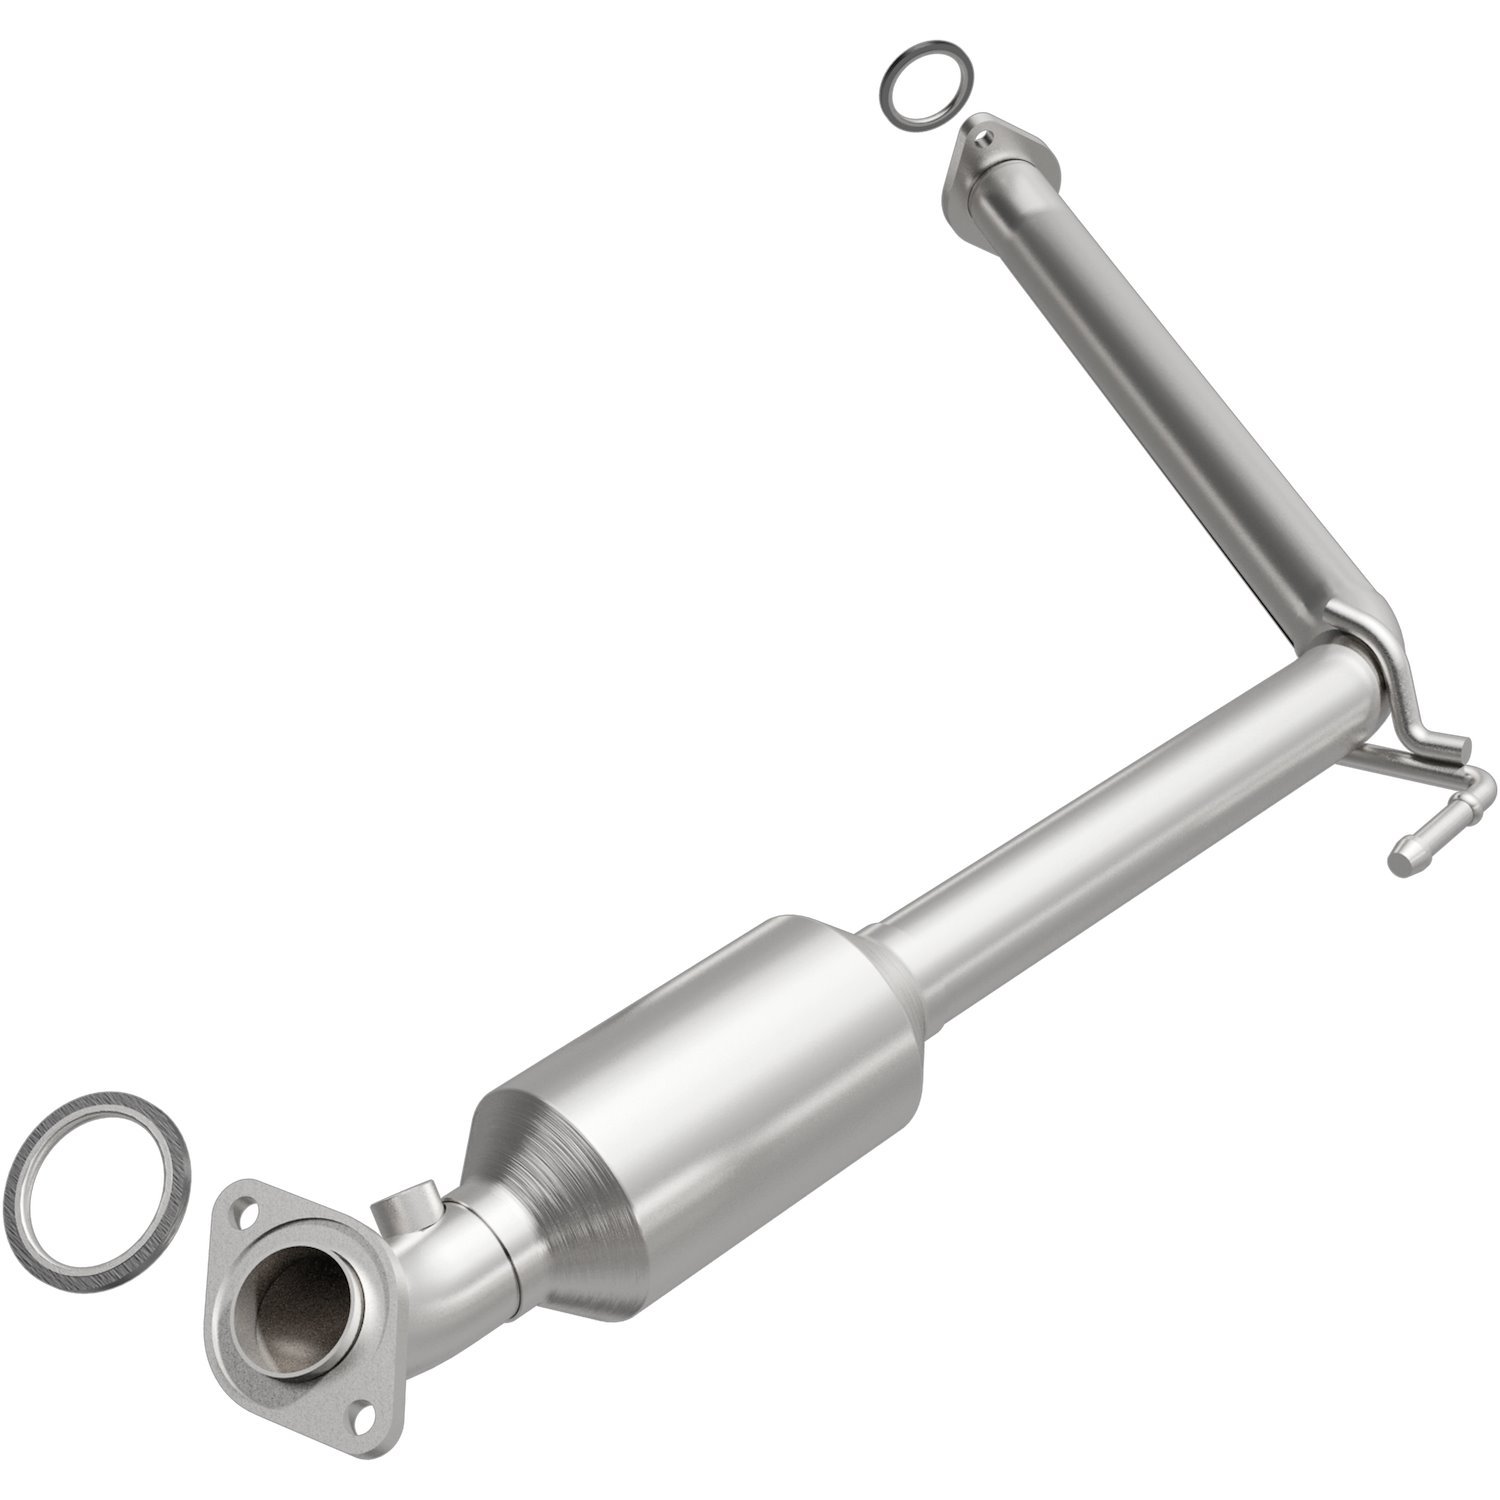 2005-2006 Toyota Tundra OEM Grade Federal / EPA Compliant Direct-Fit Catalytic Converter